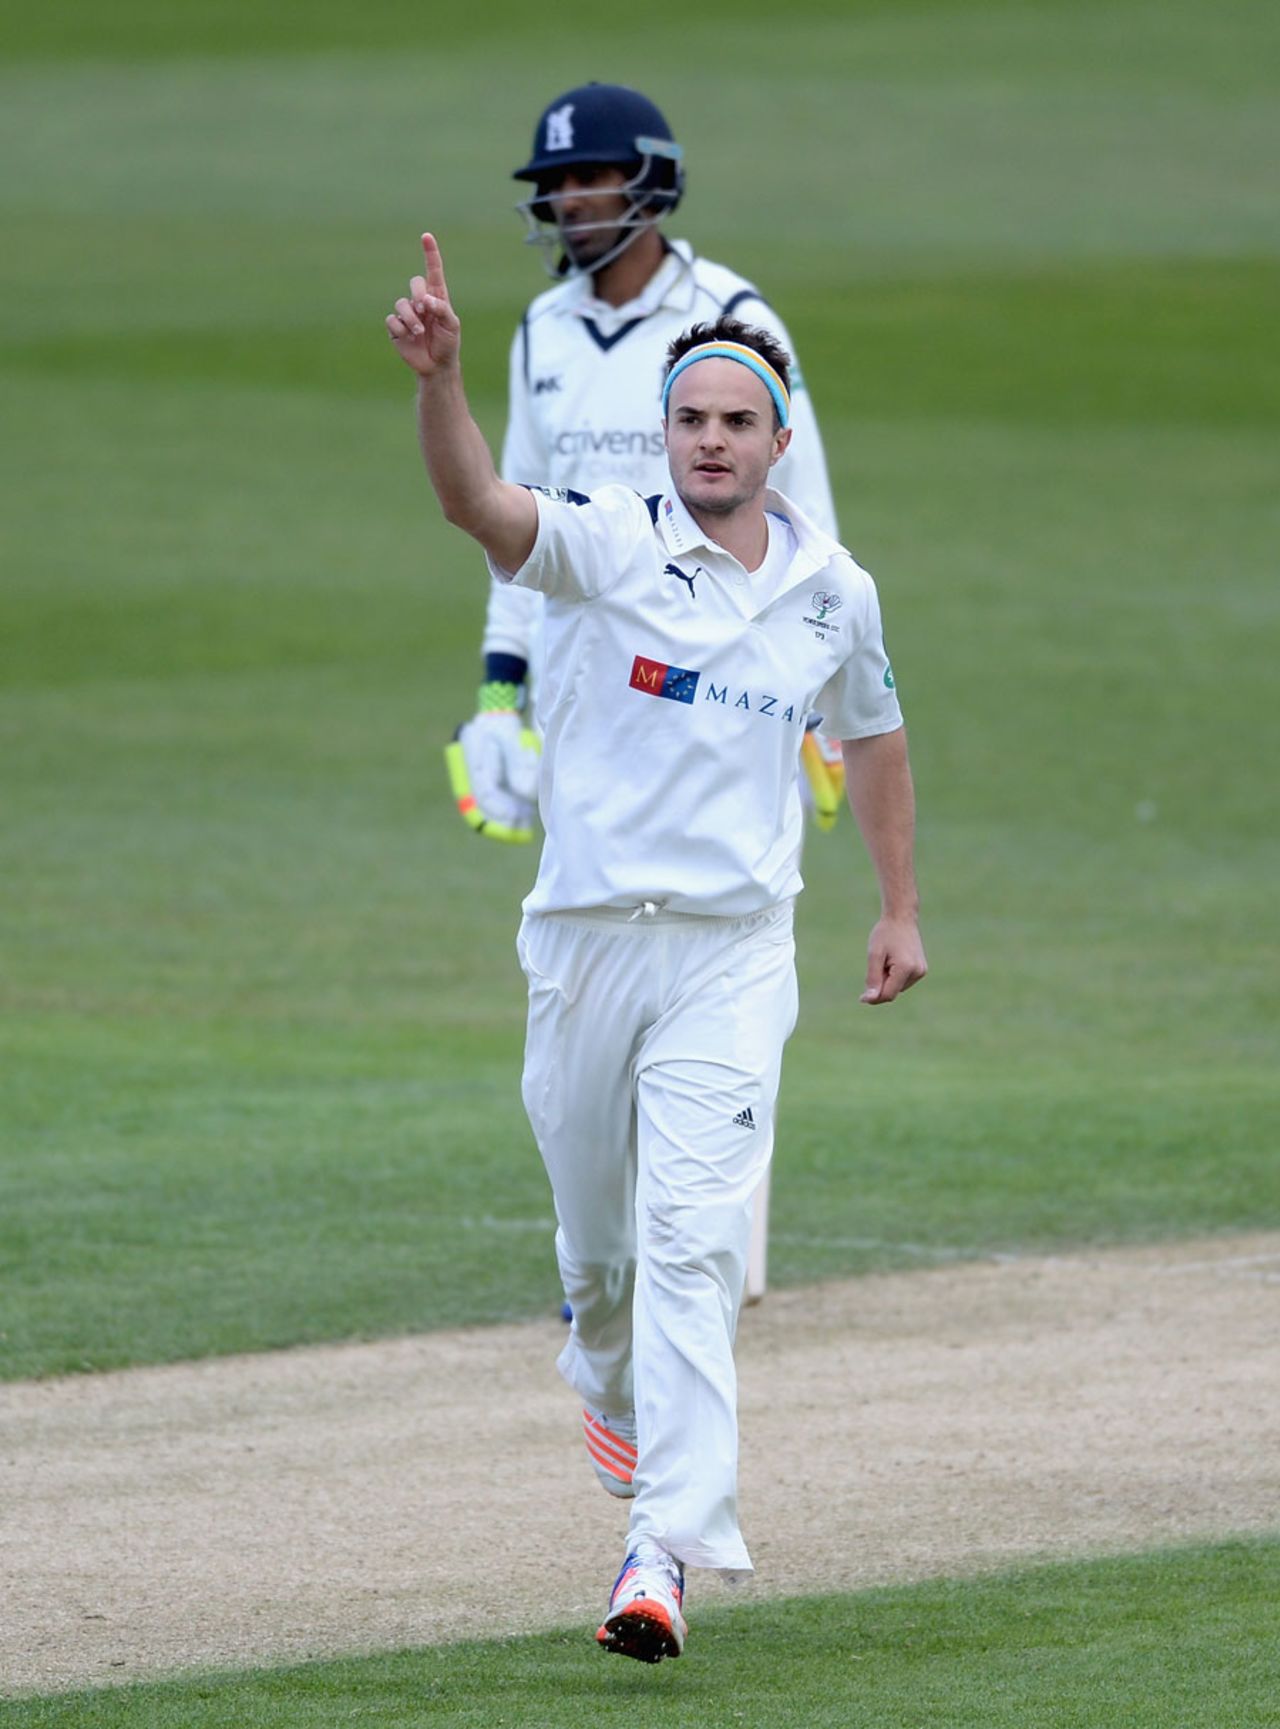 Jack Brooks struck in his third over, Warwickshire v Yorkshire, County Championship, Division One, Edgbaston, 3rd day, April 26, 2015